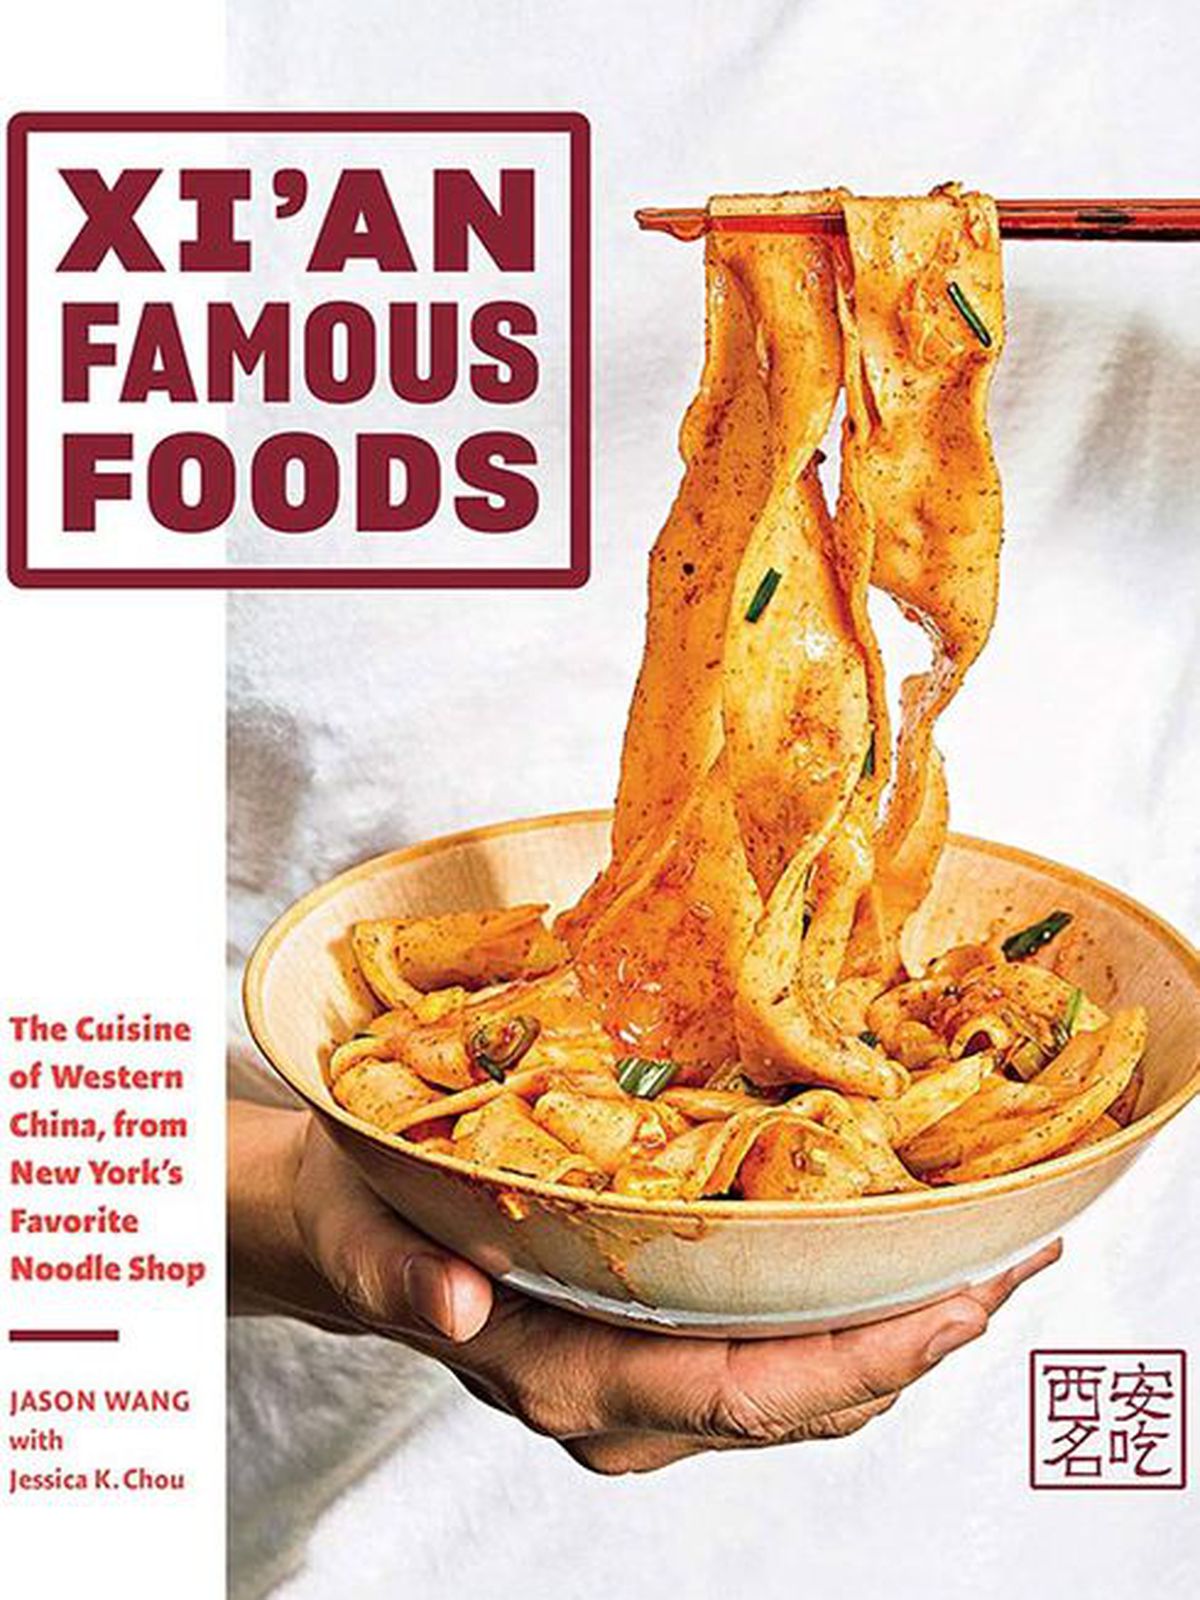 Cover of “Xi’an Famous Foods.”